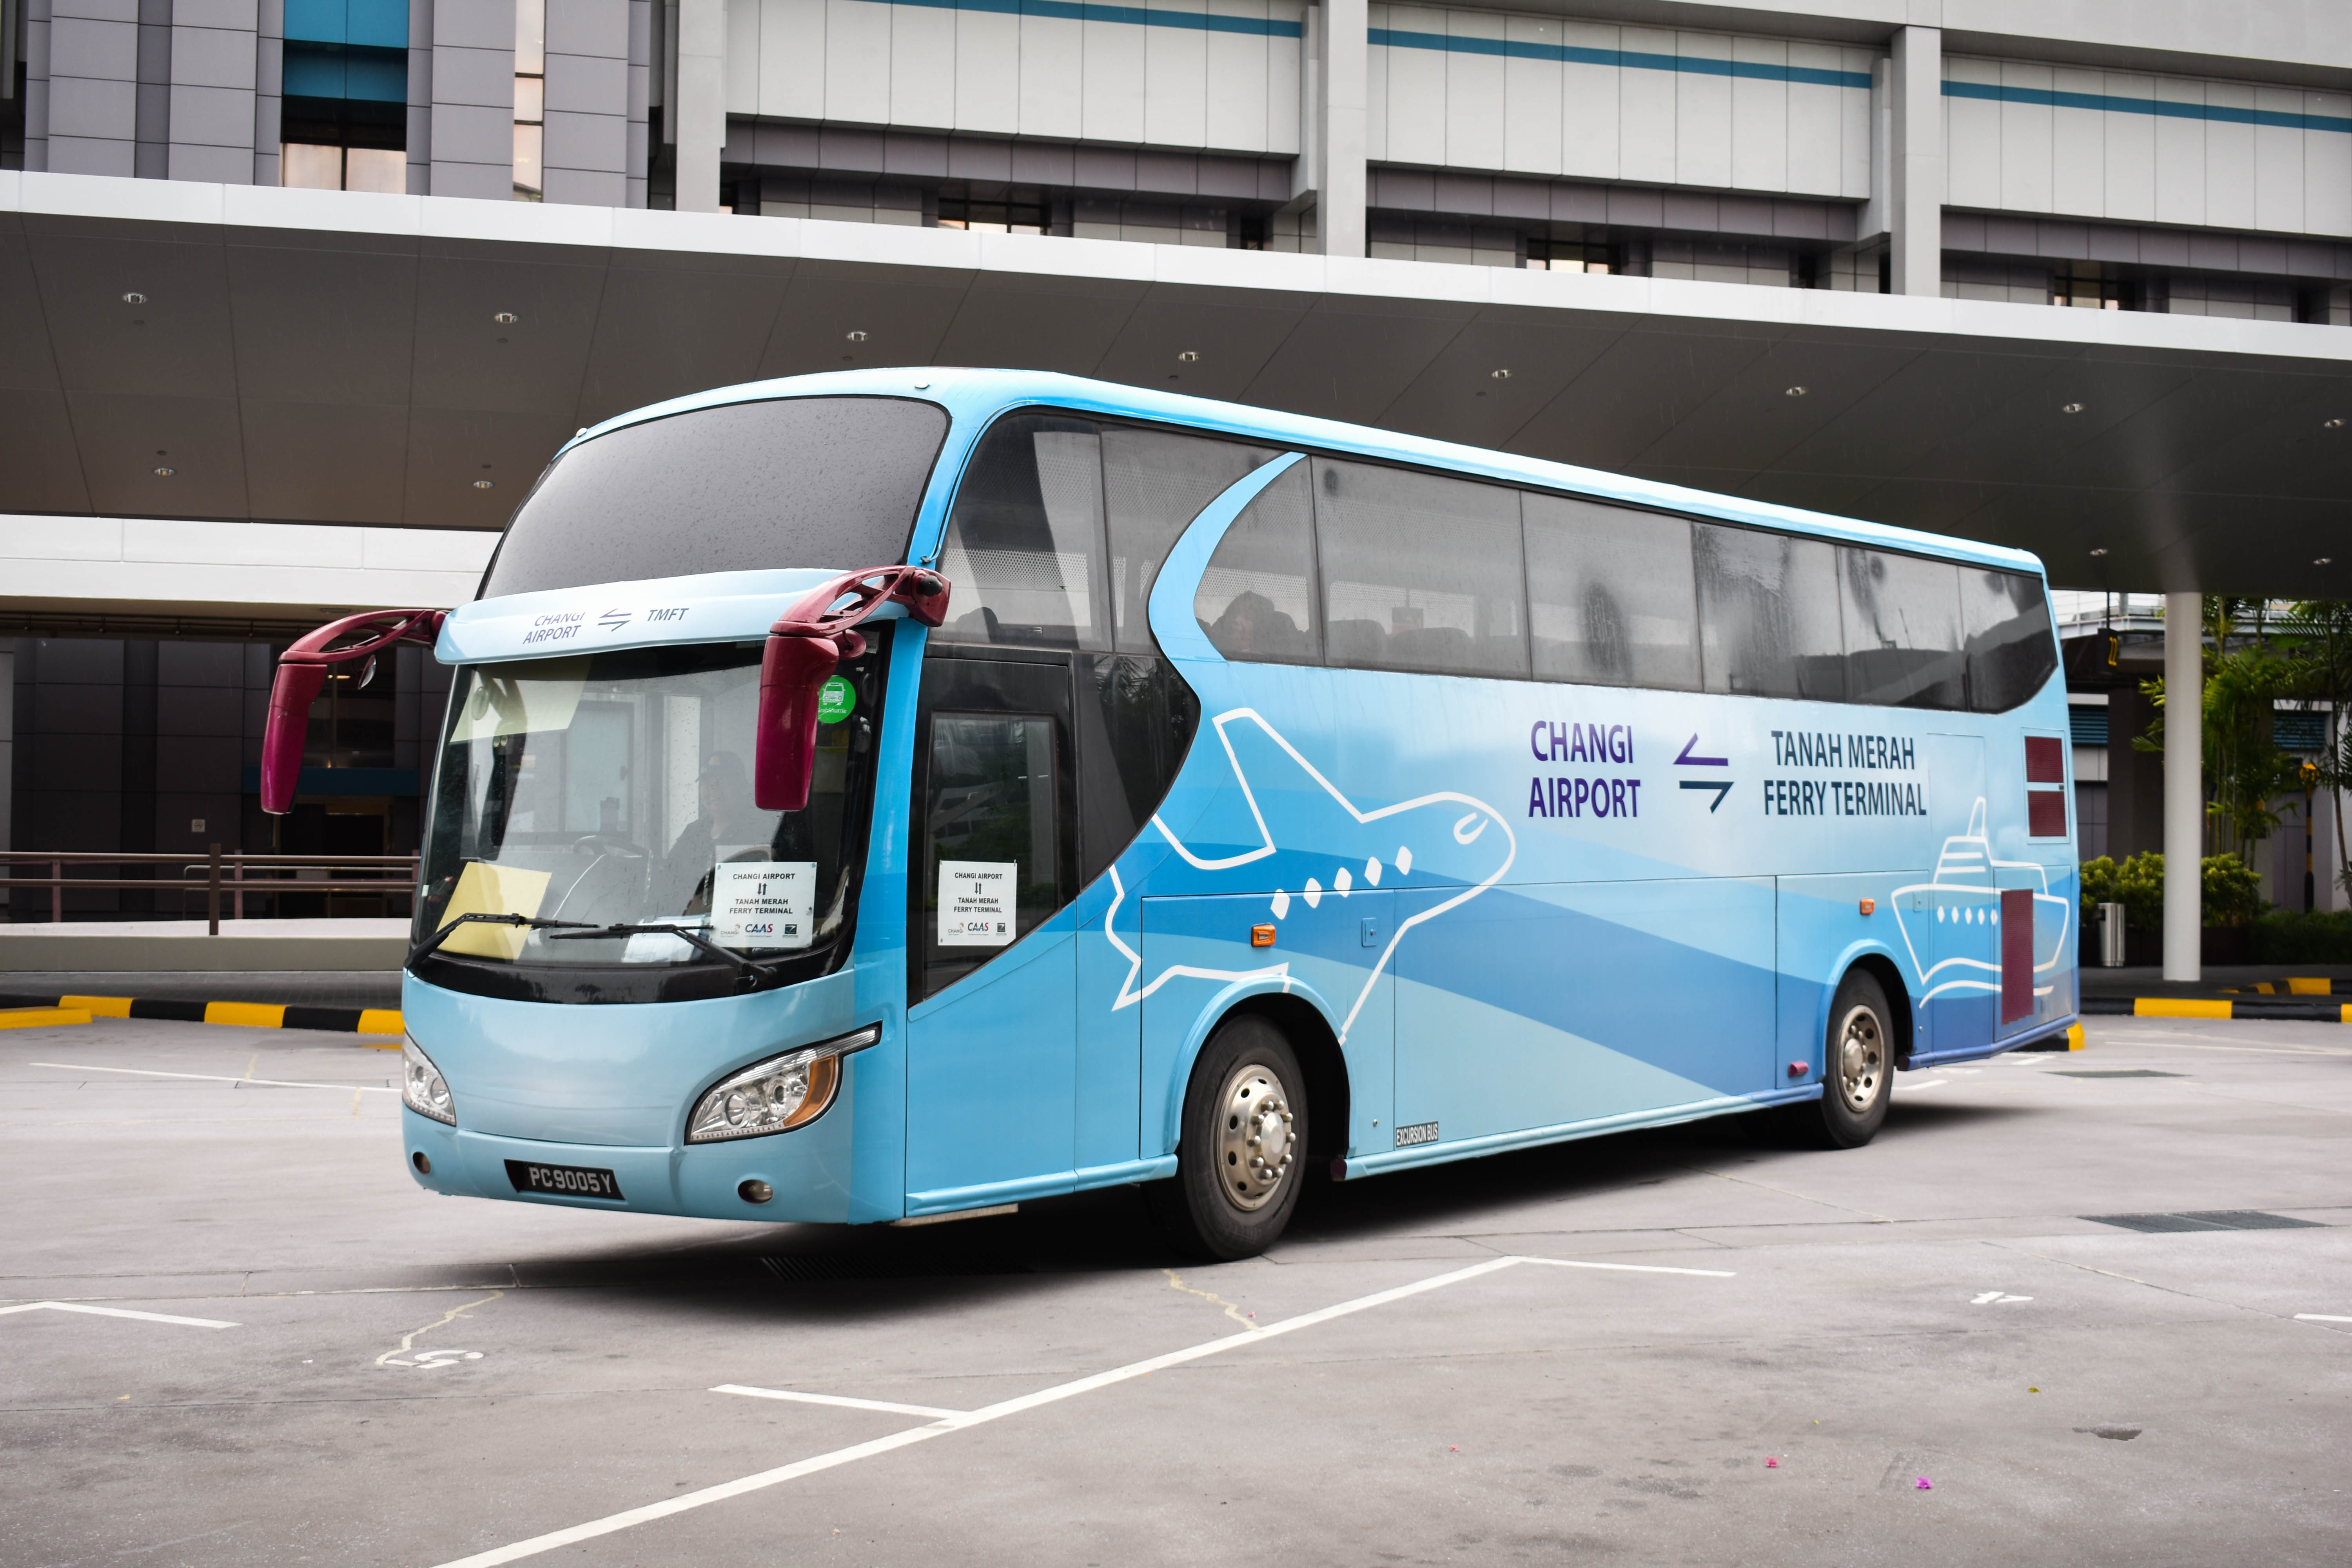 Let's take the bus: Services from Changi Airport you ...